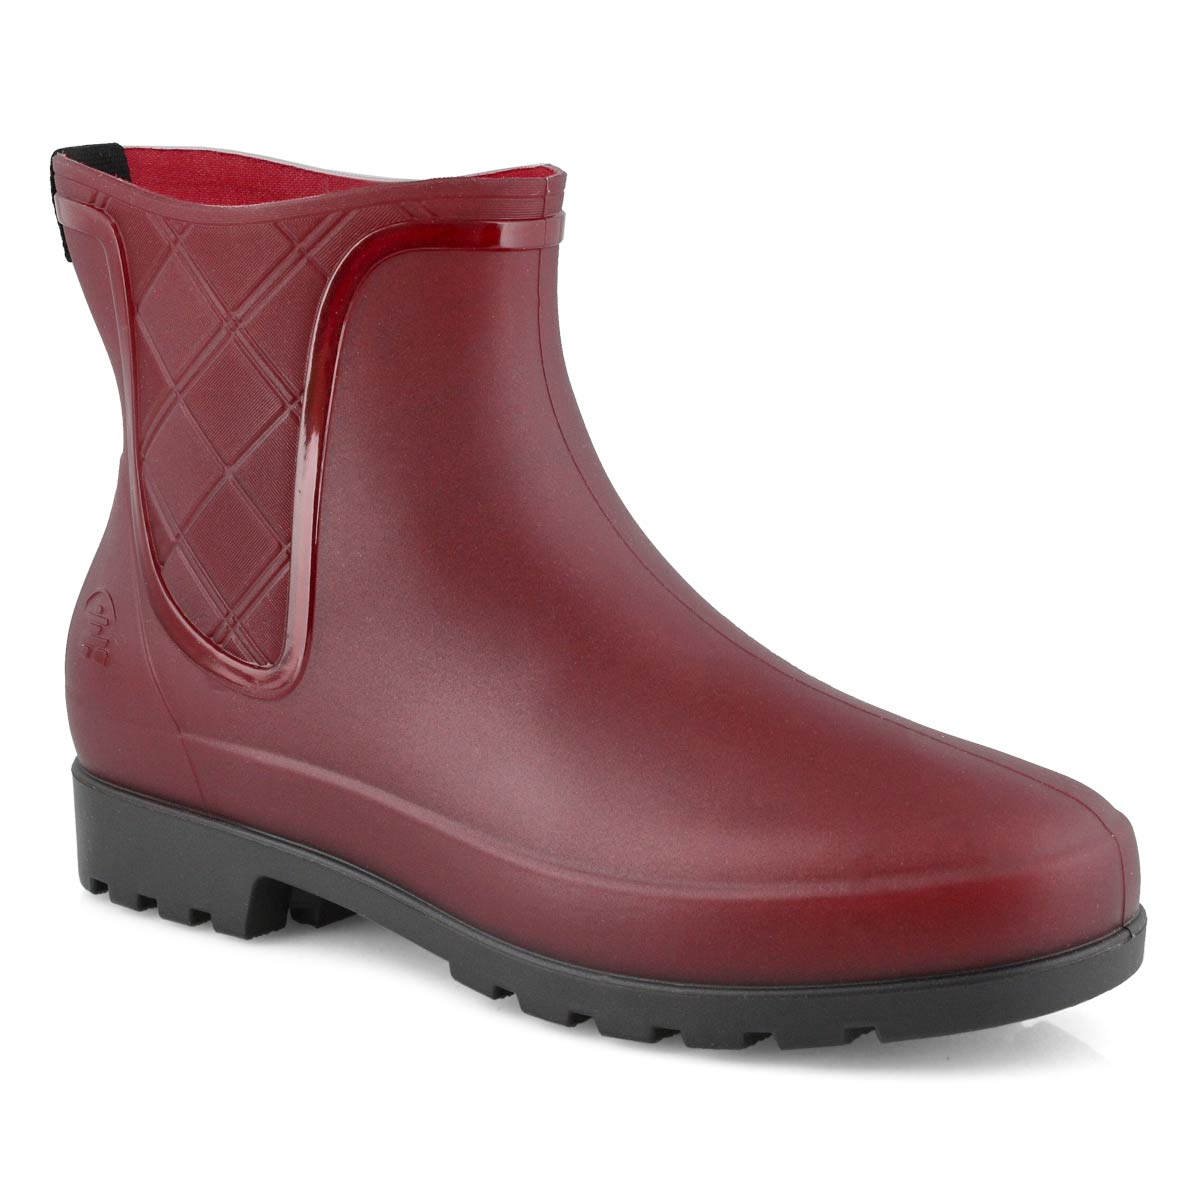 tony bianco red boots